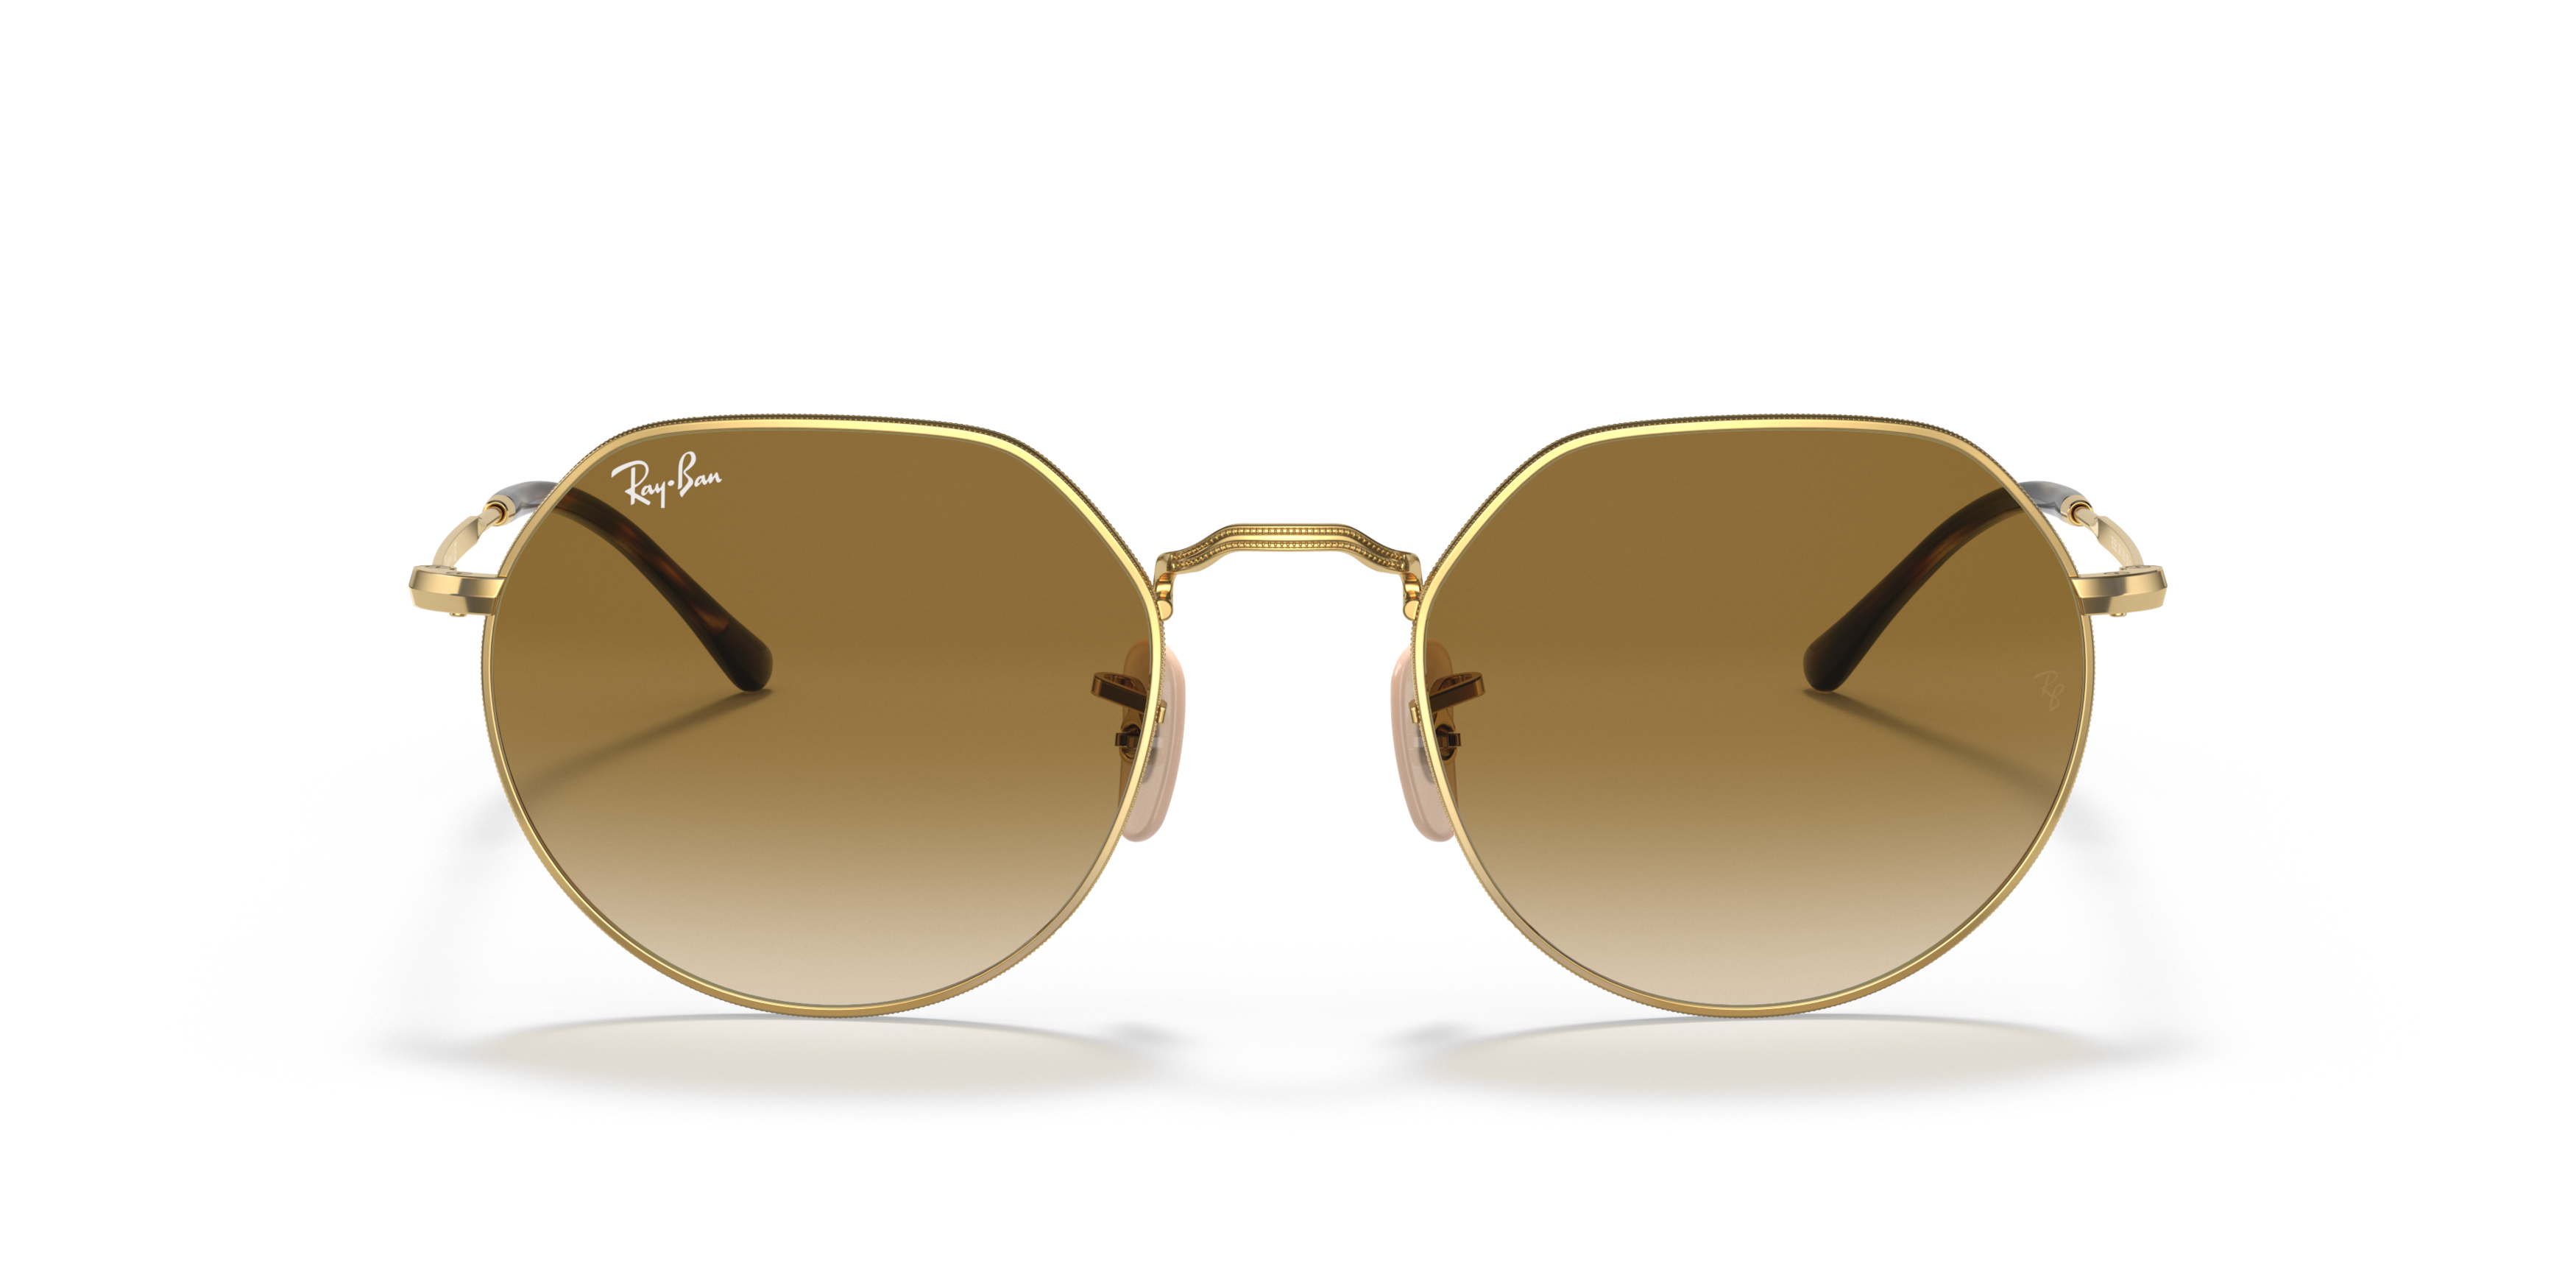 [products.image.front] RAY-BAN RB3565 001/51